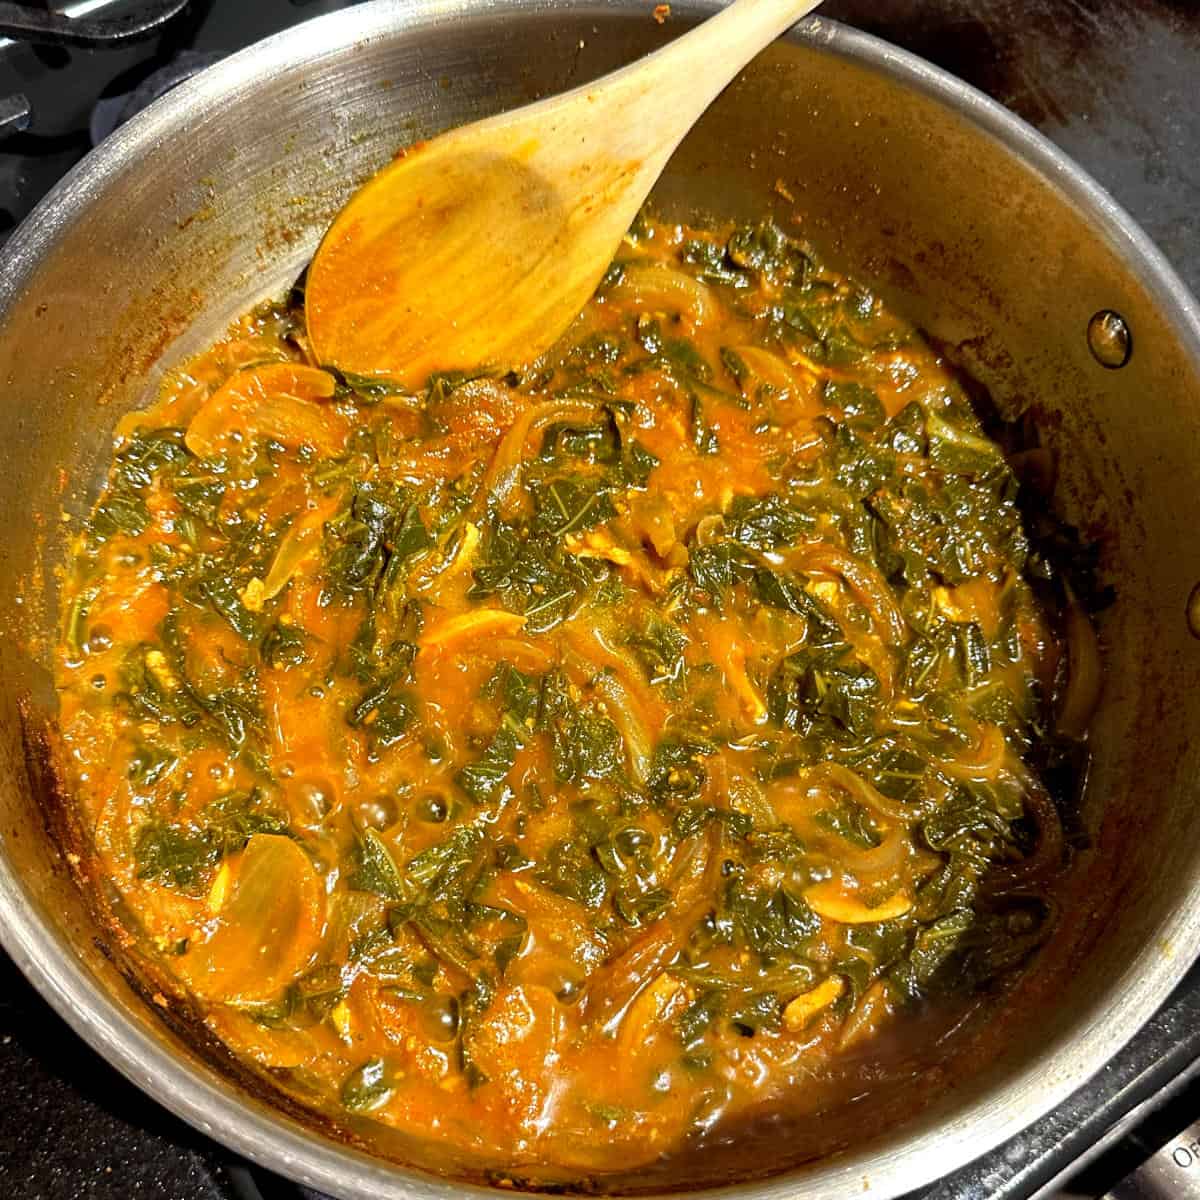 Kashmiri collard greens, cooked, in pan with wooden ladle.